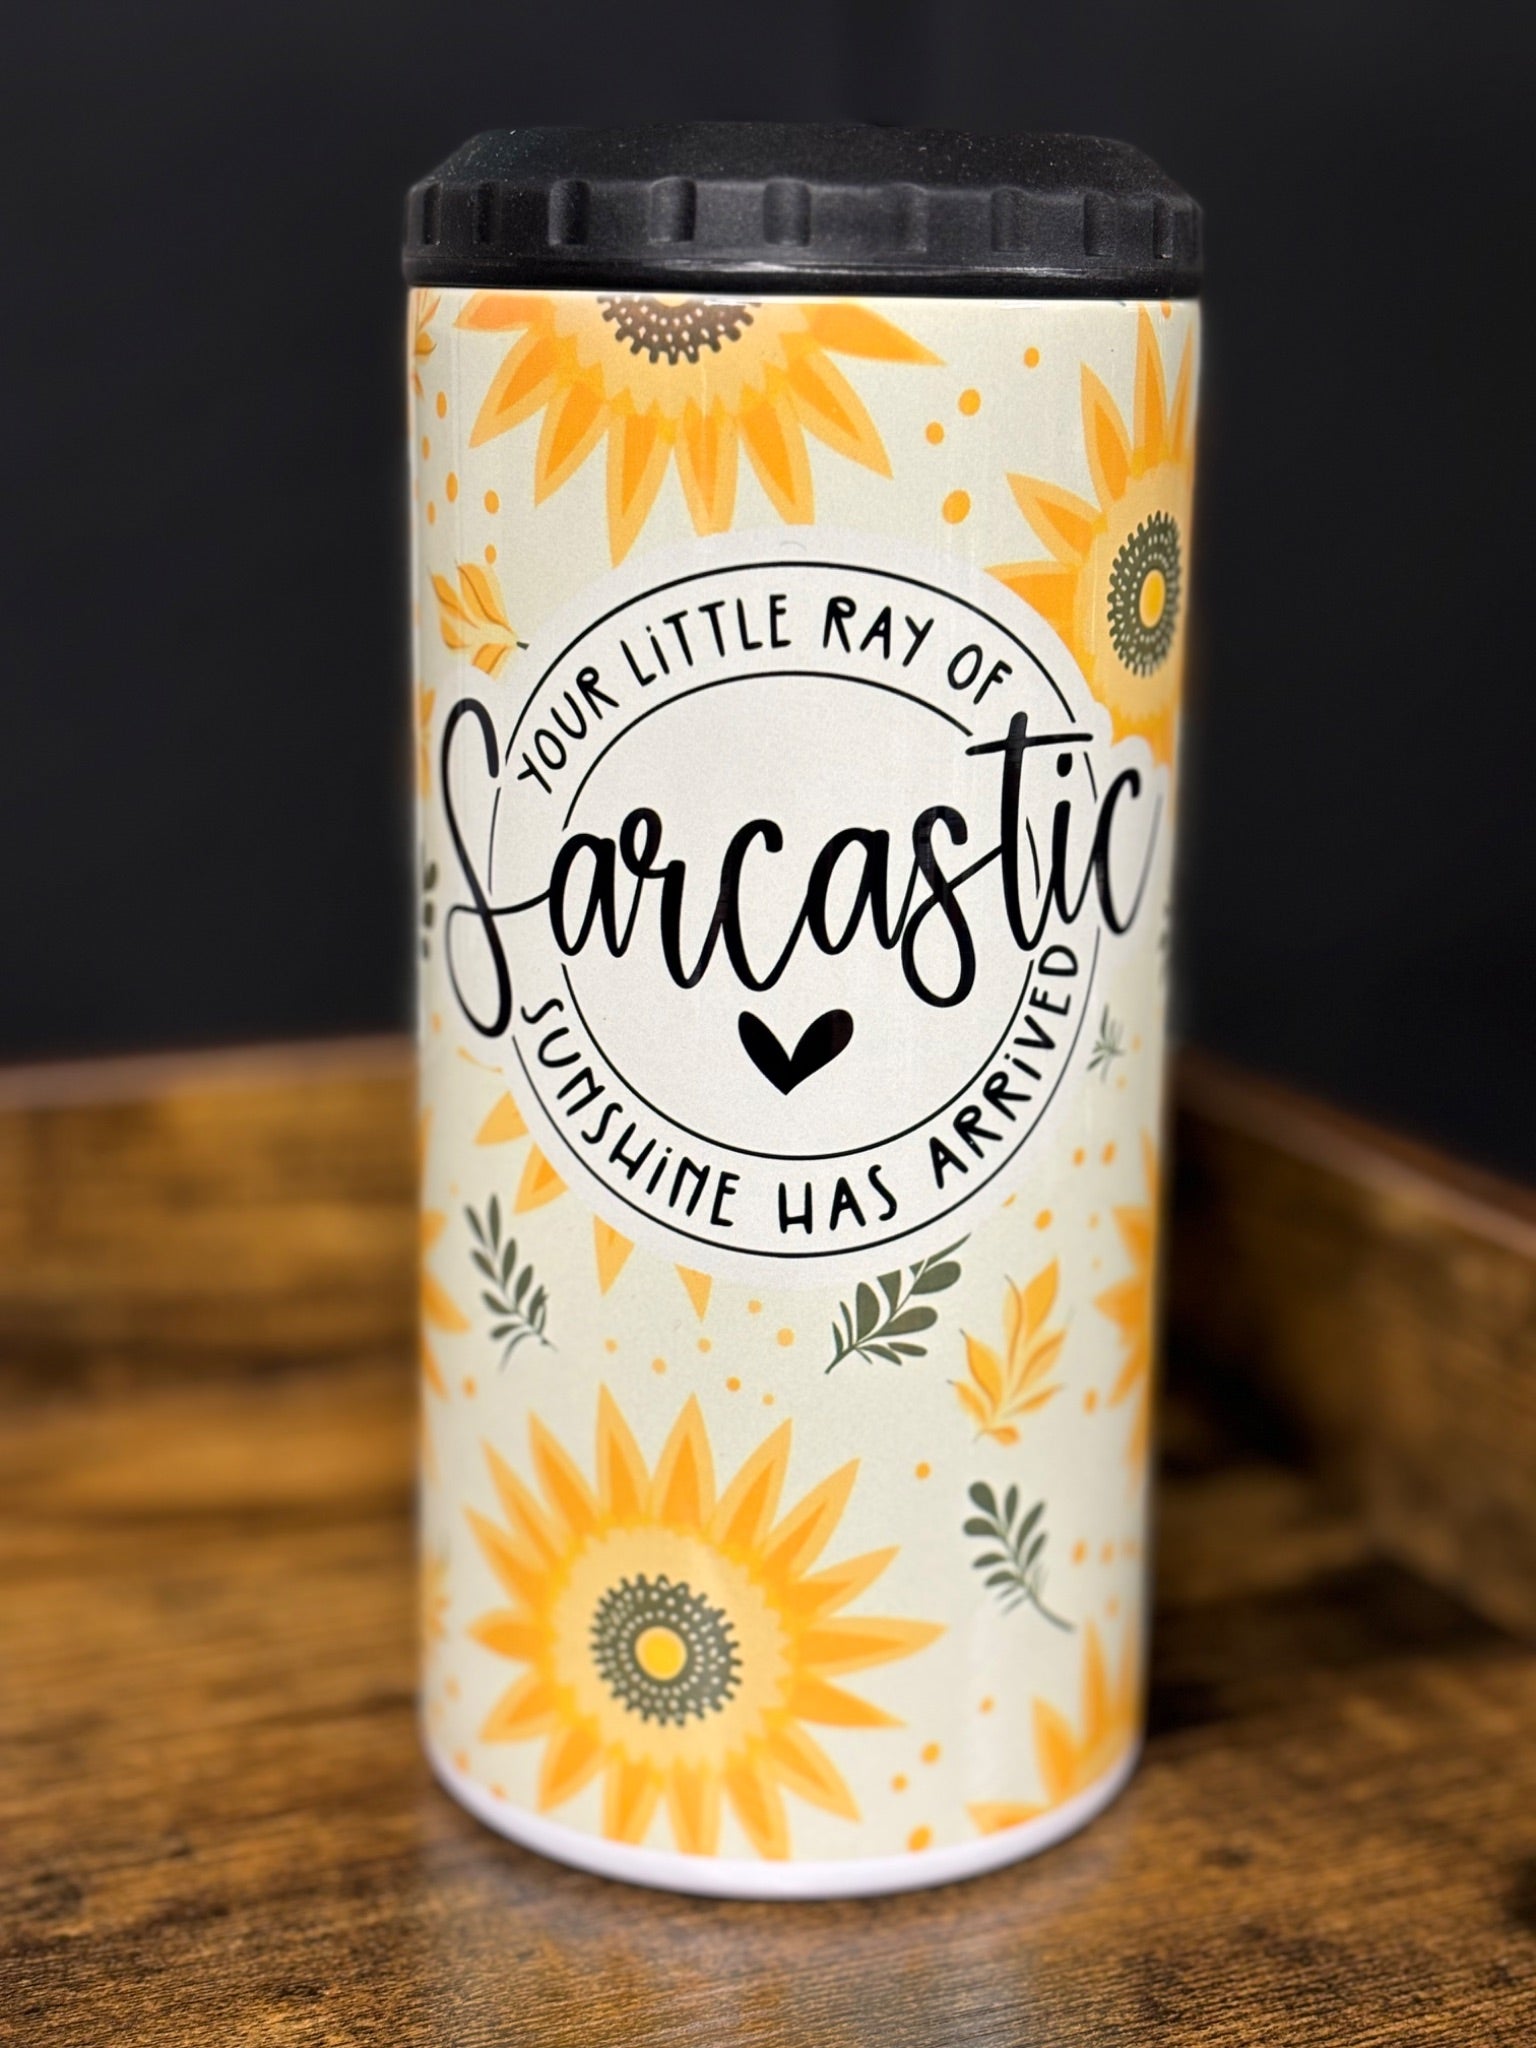 Your Little Ray of Sarcastic Sunshine 4 in 1 Can Cooler